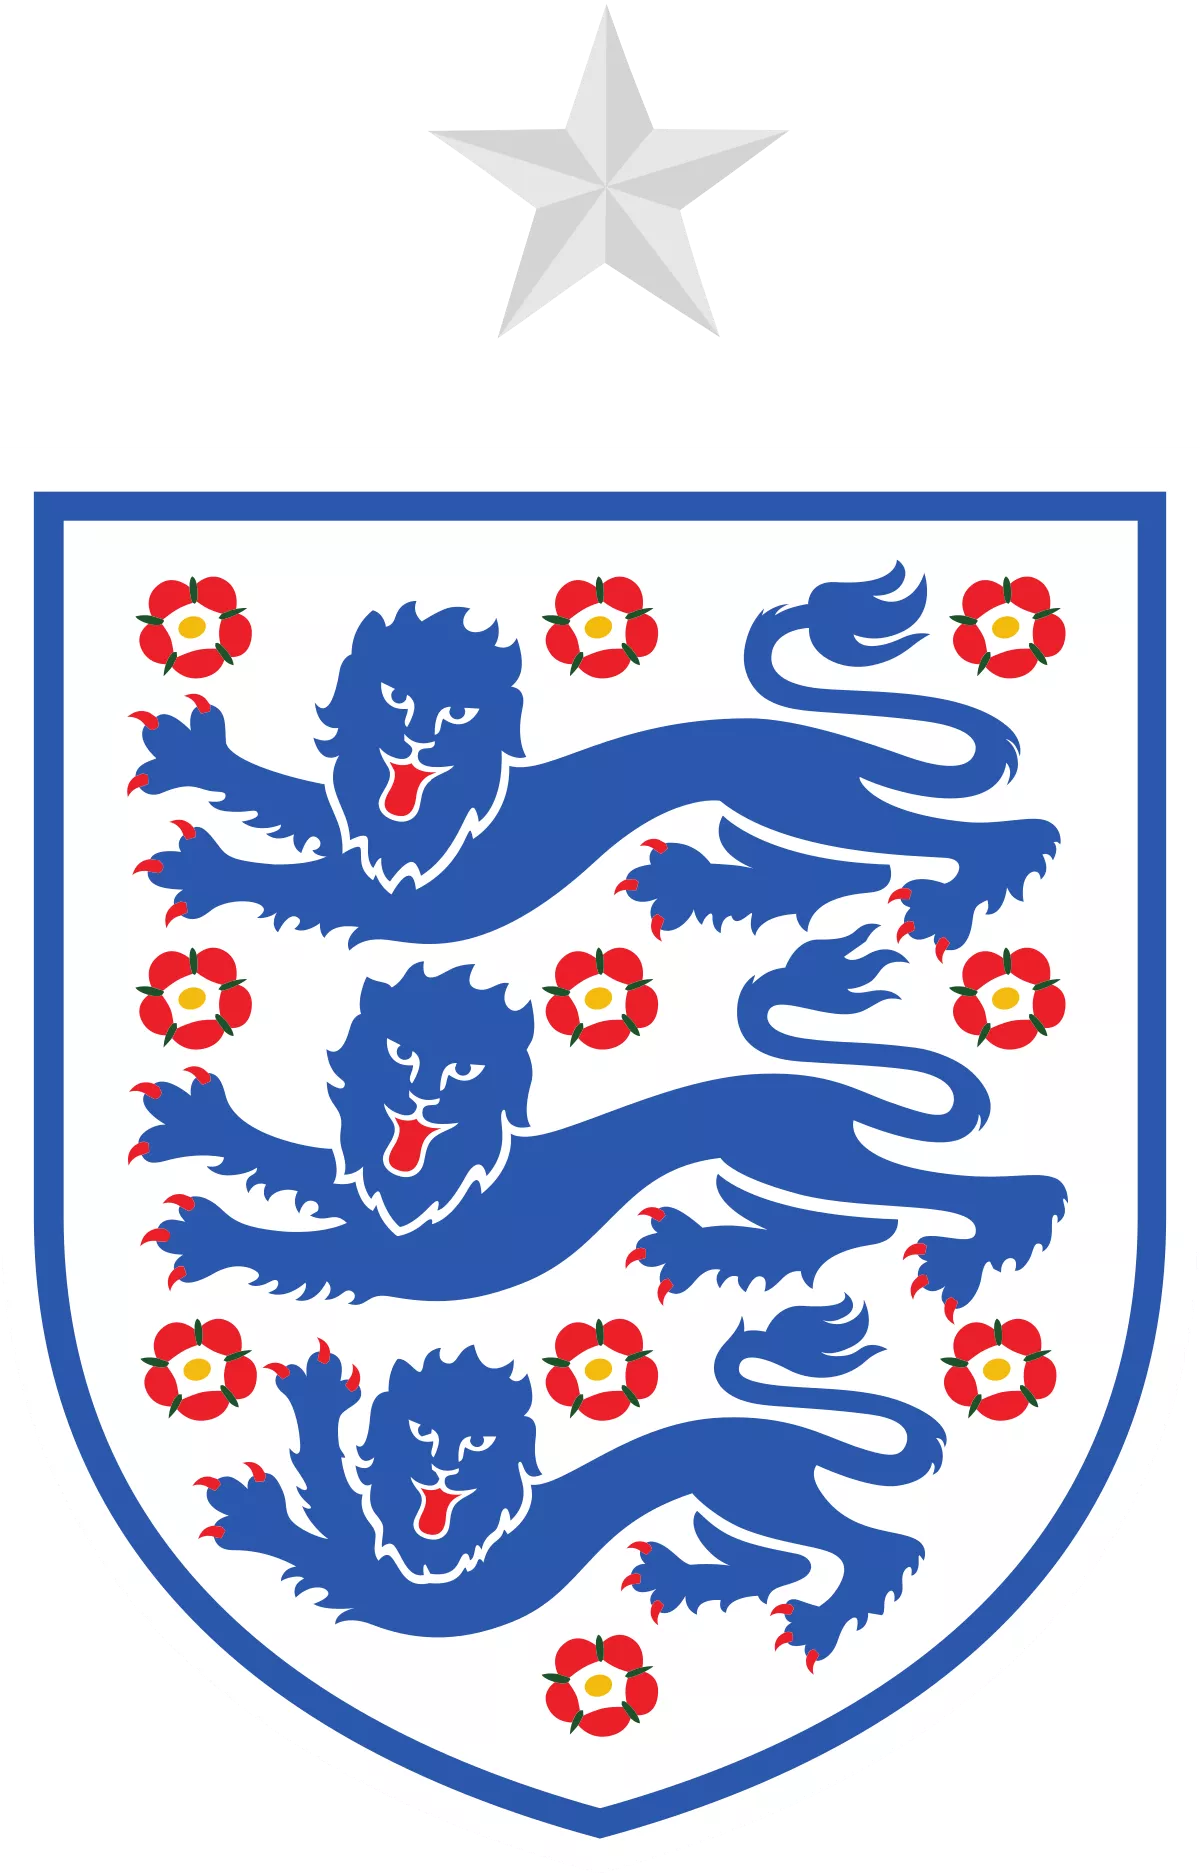 England - Best Soccer Players